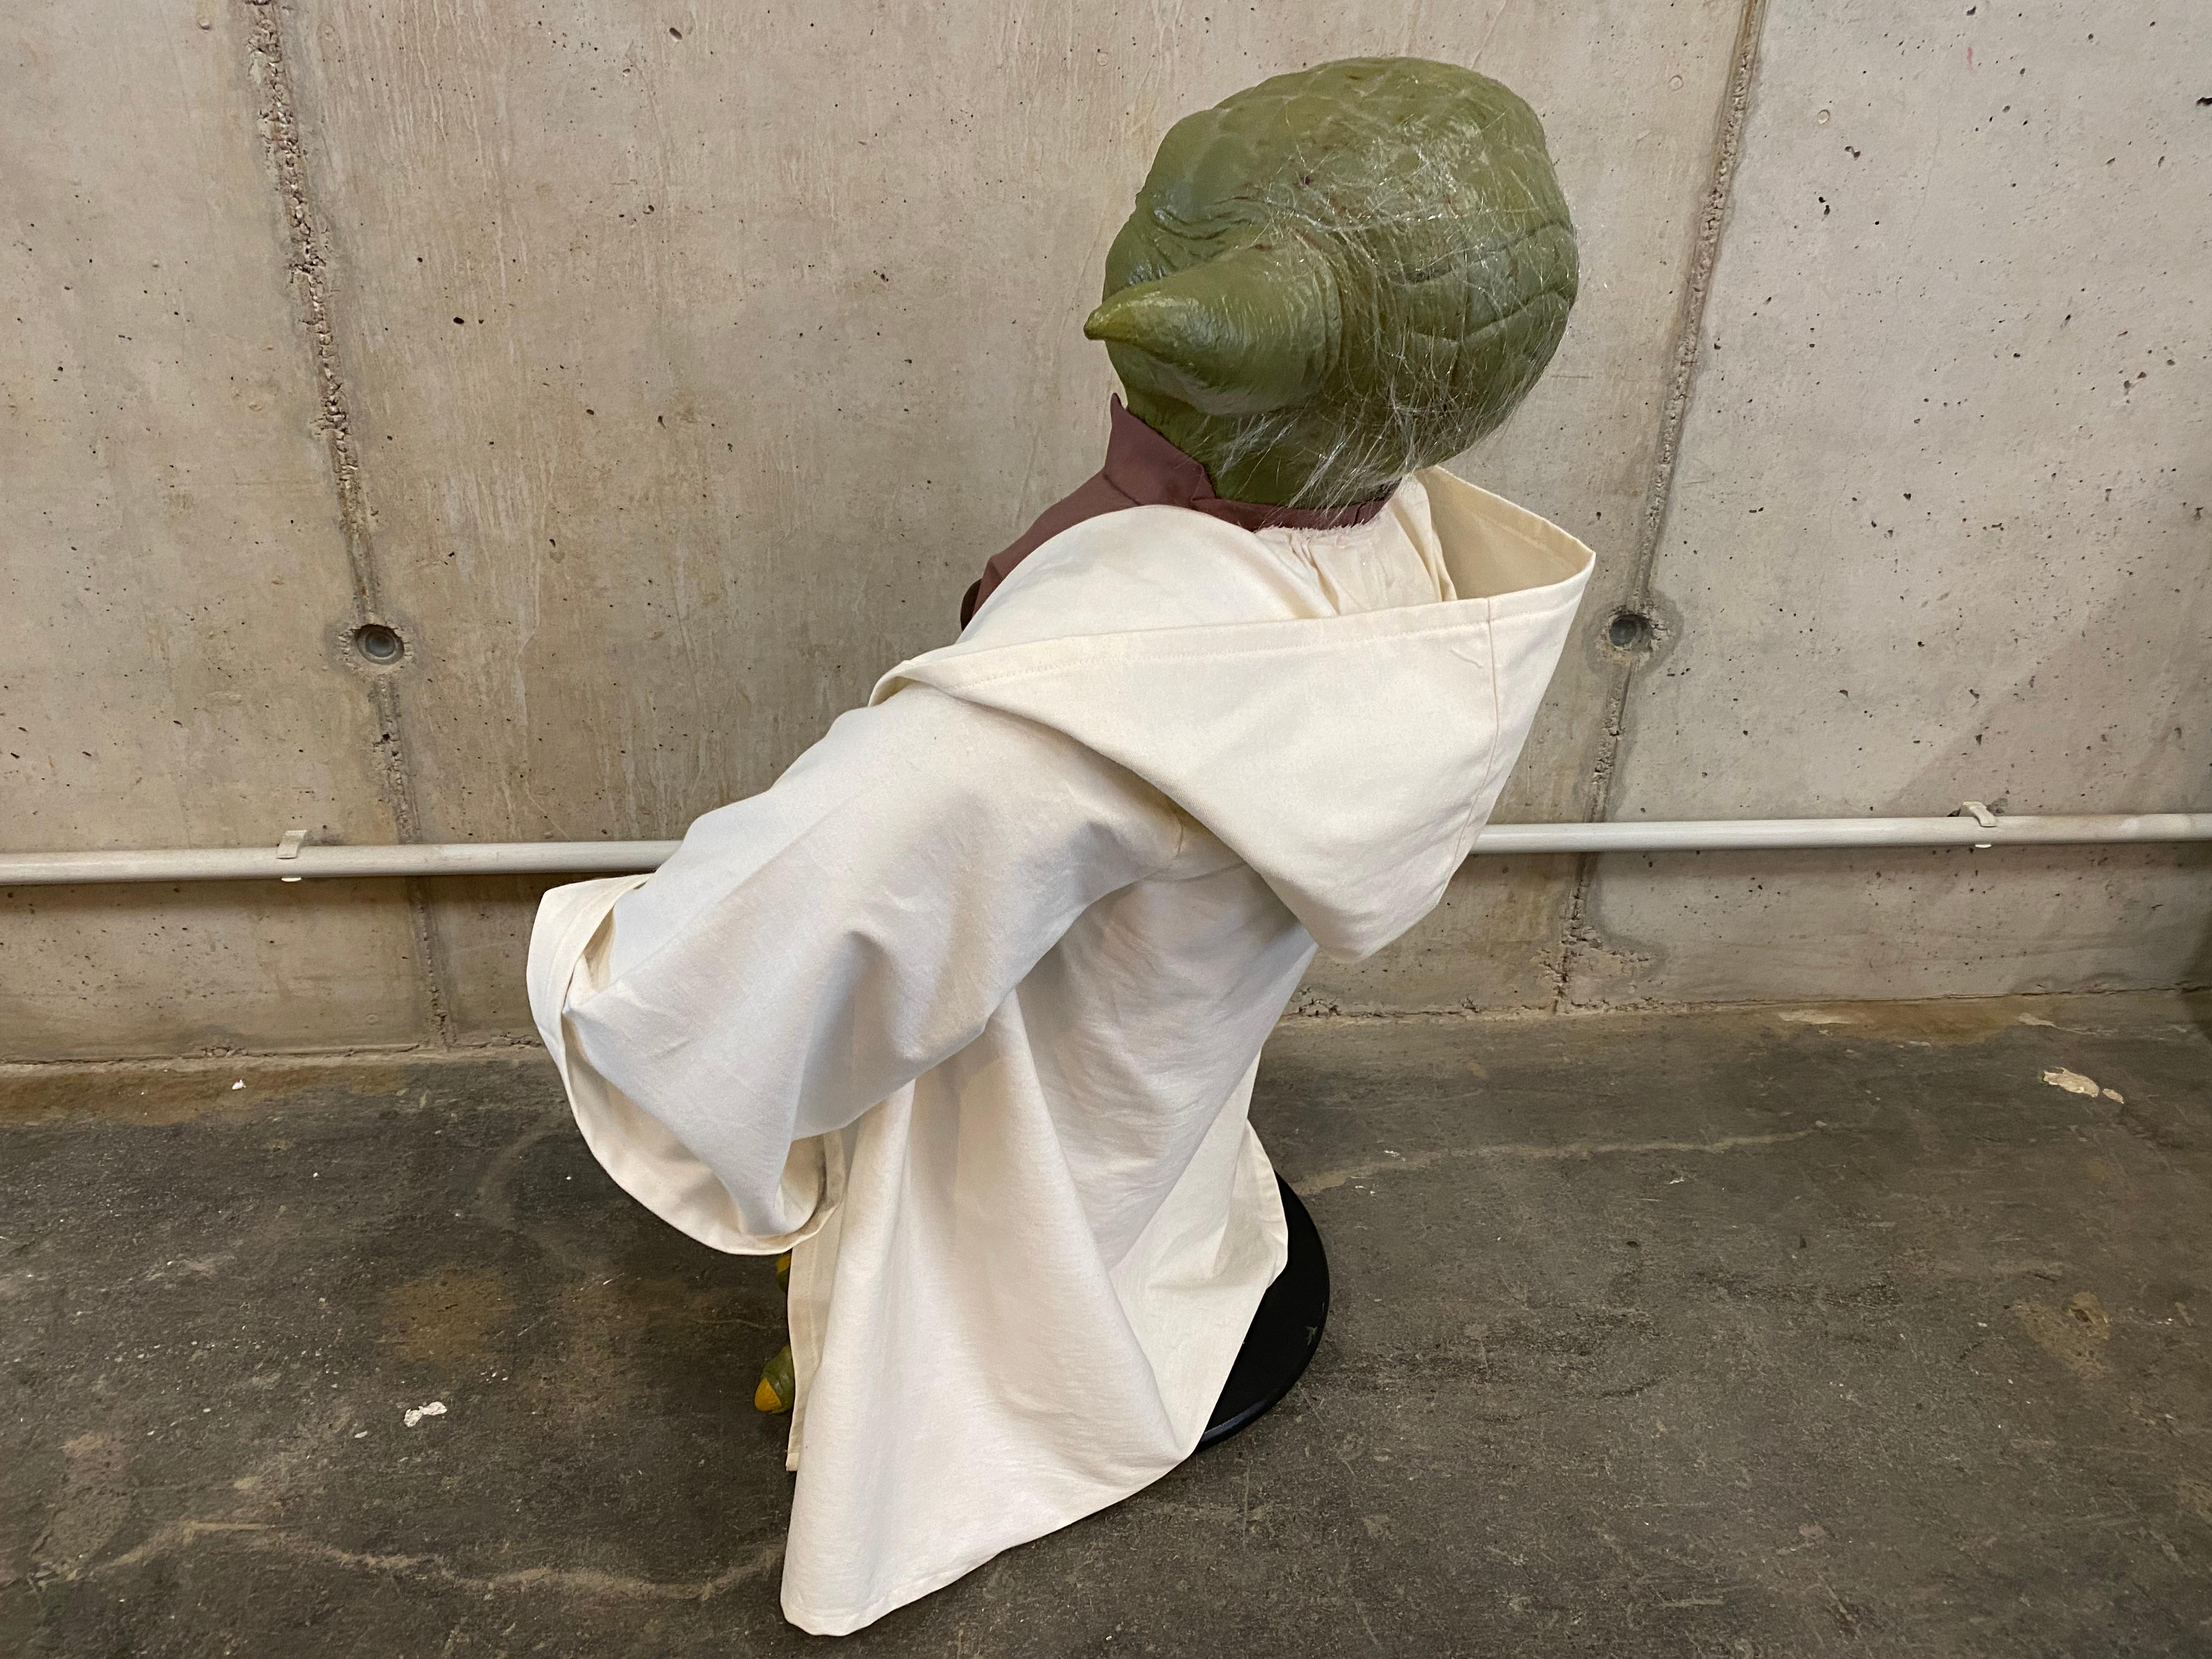 American Life Size Yoda Figure, Edition of 50, Could Be Star Wars Photo Requisite For Sale